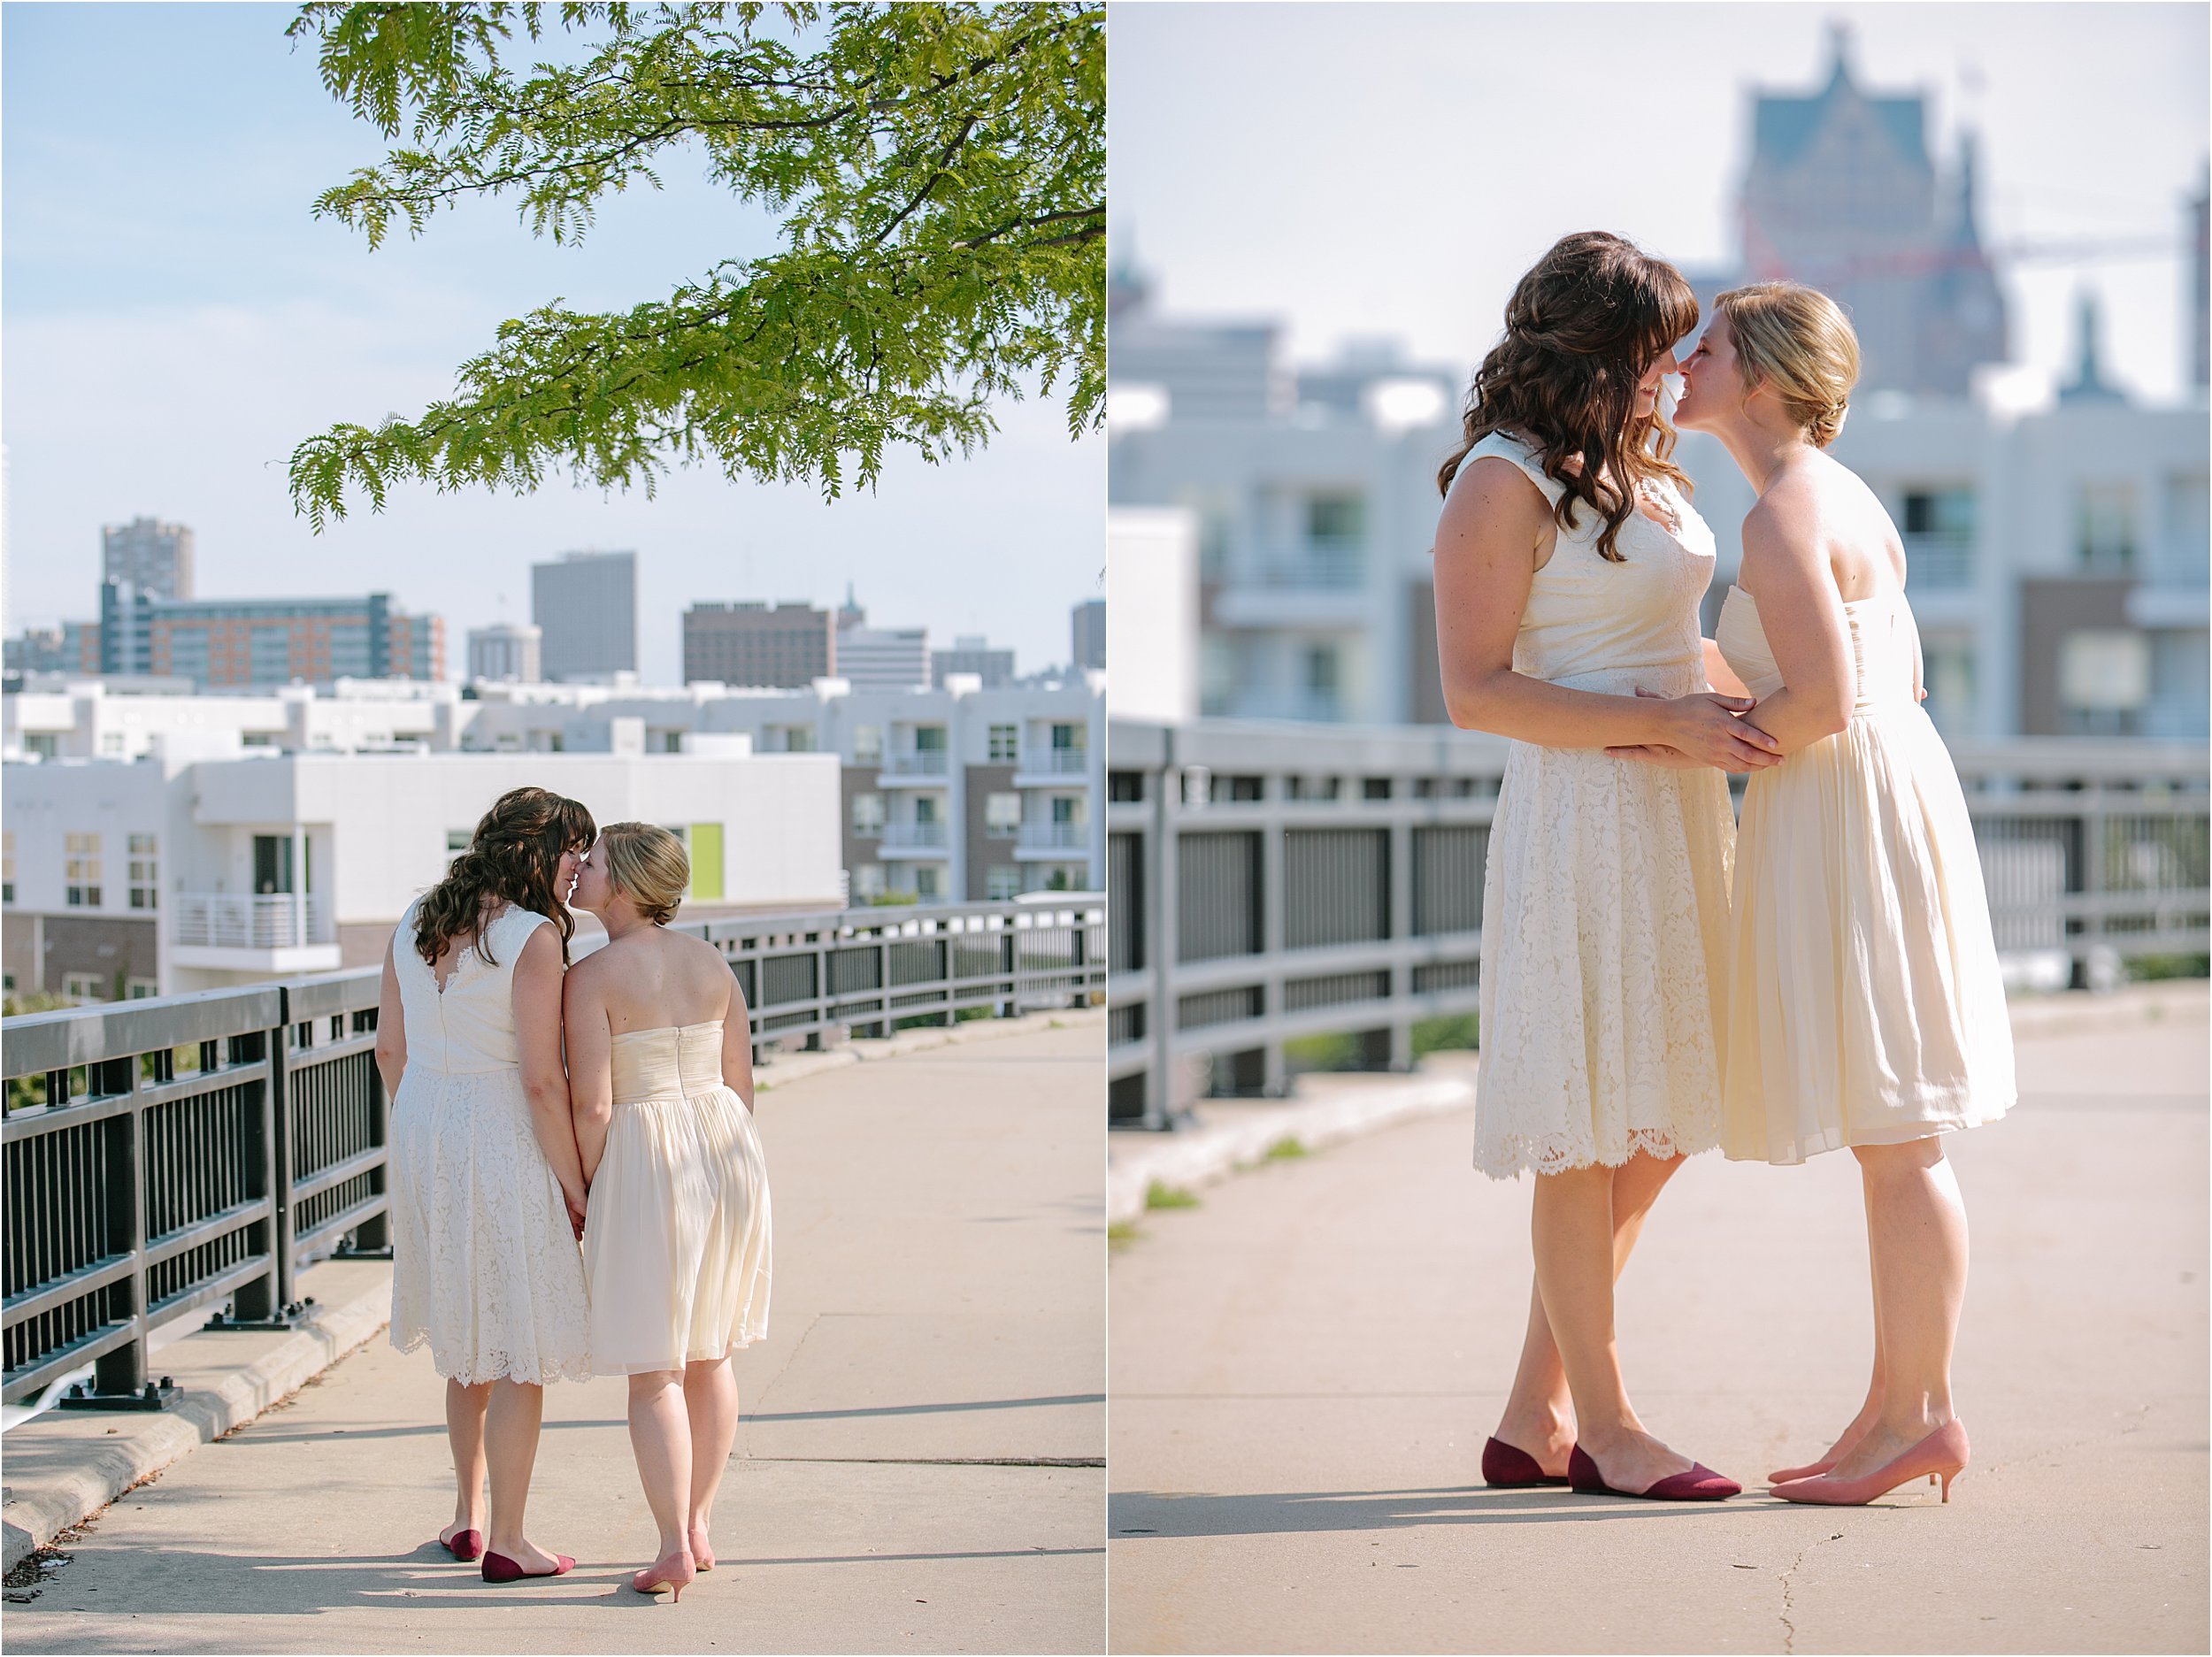 21-two-brides-outdoor-intimate-lgbtq.JPG